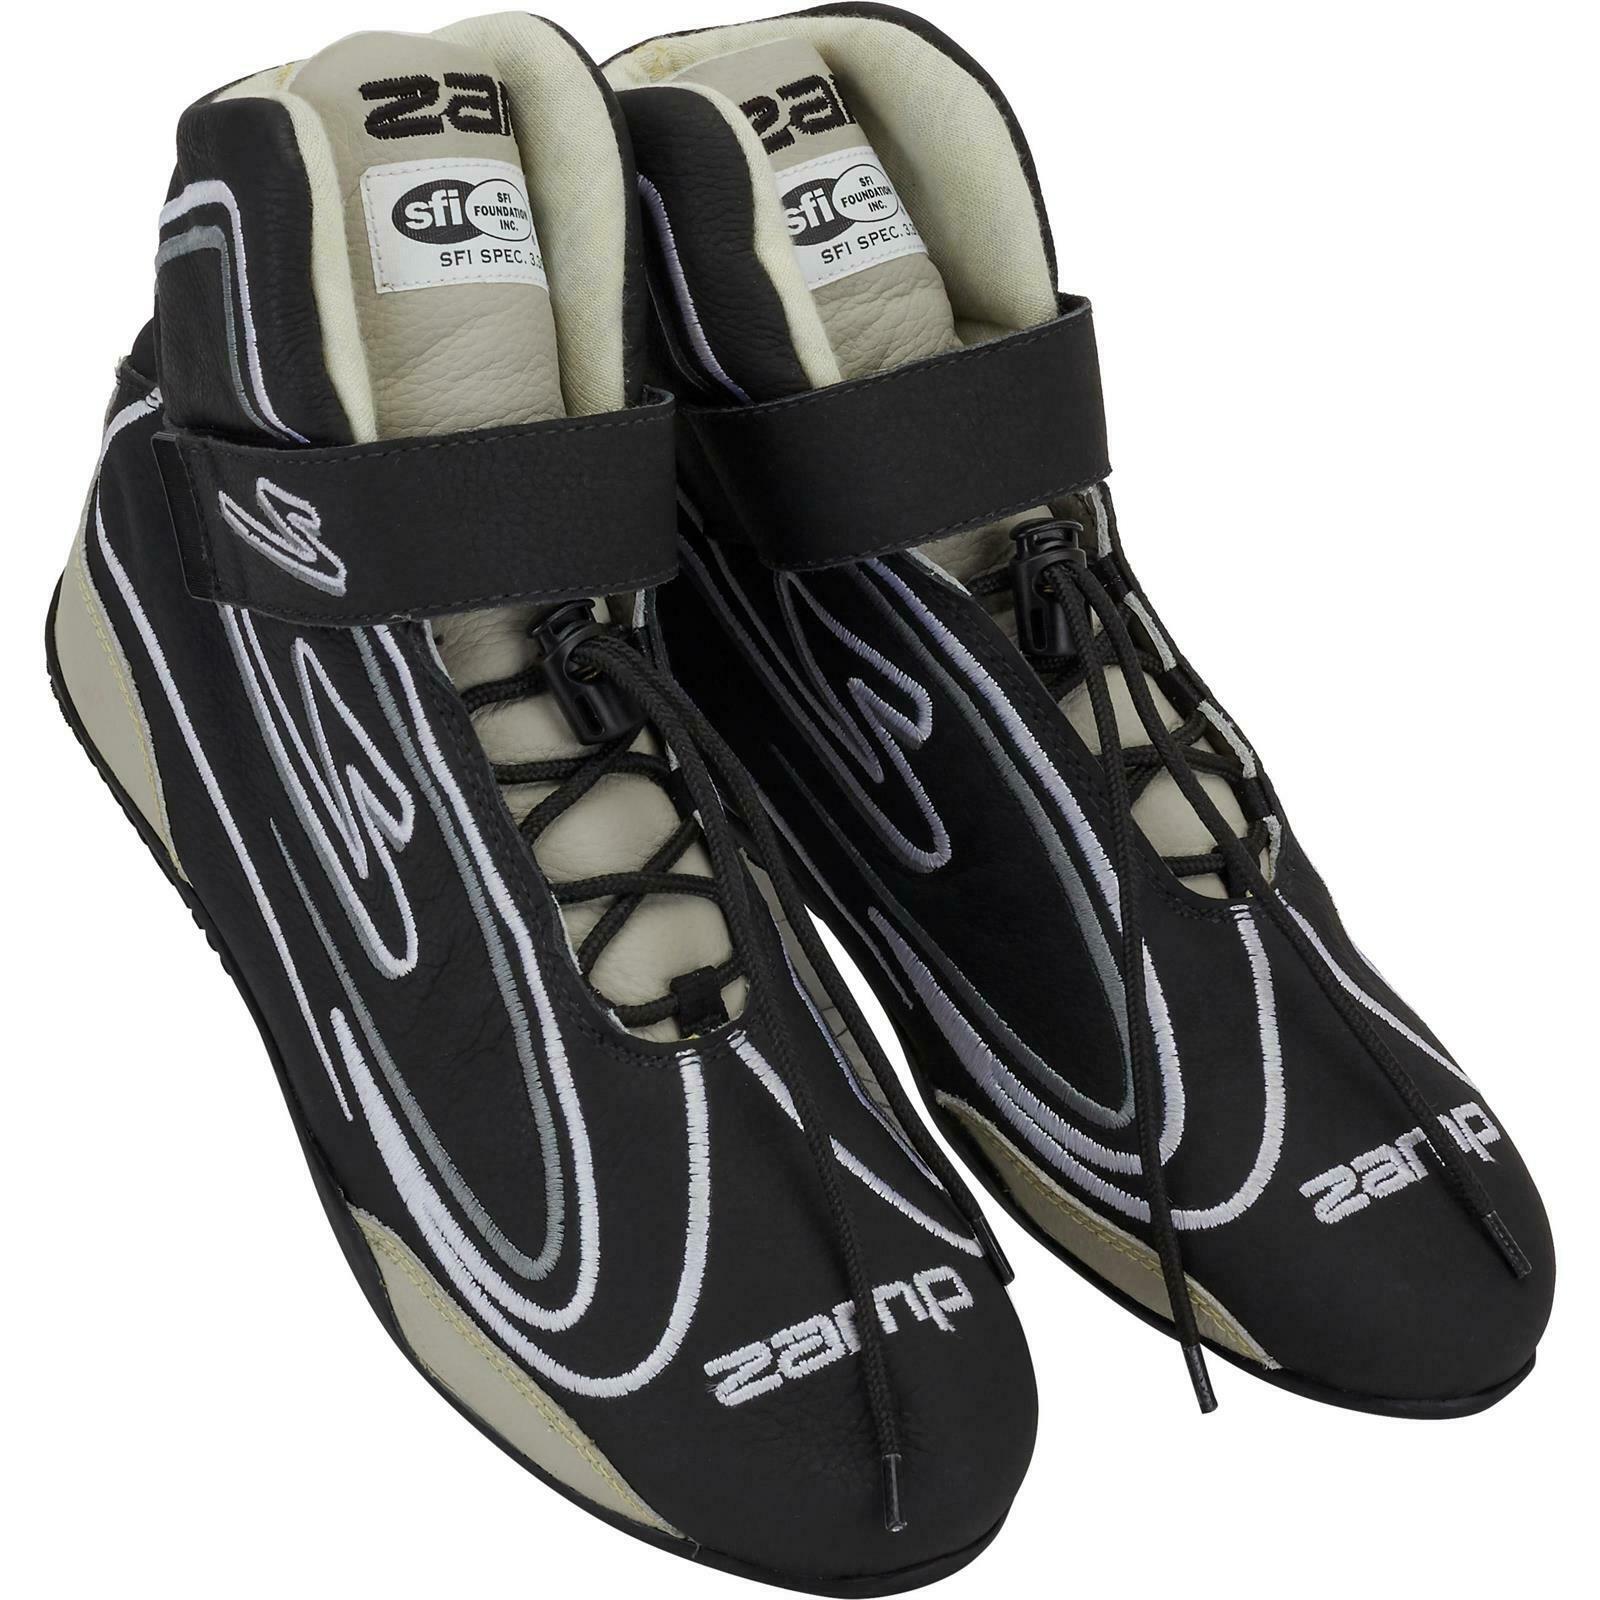 Zamp Rs002c0108 Zr50 Series Racing Shoes, Black, Size 8